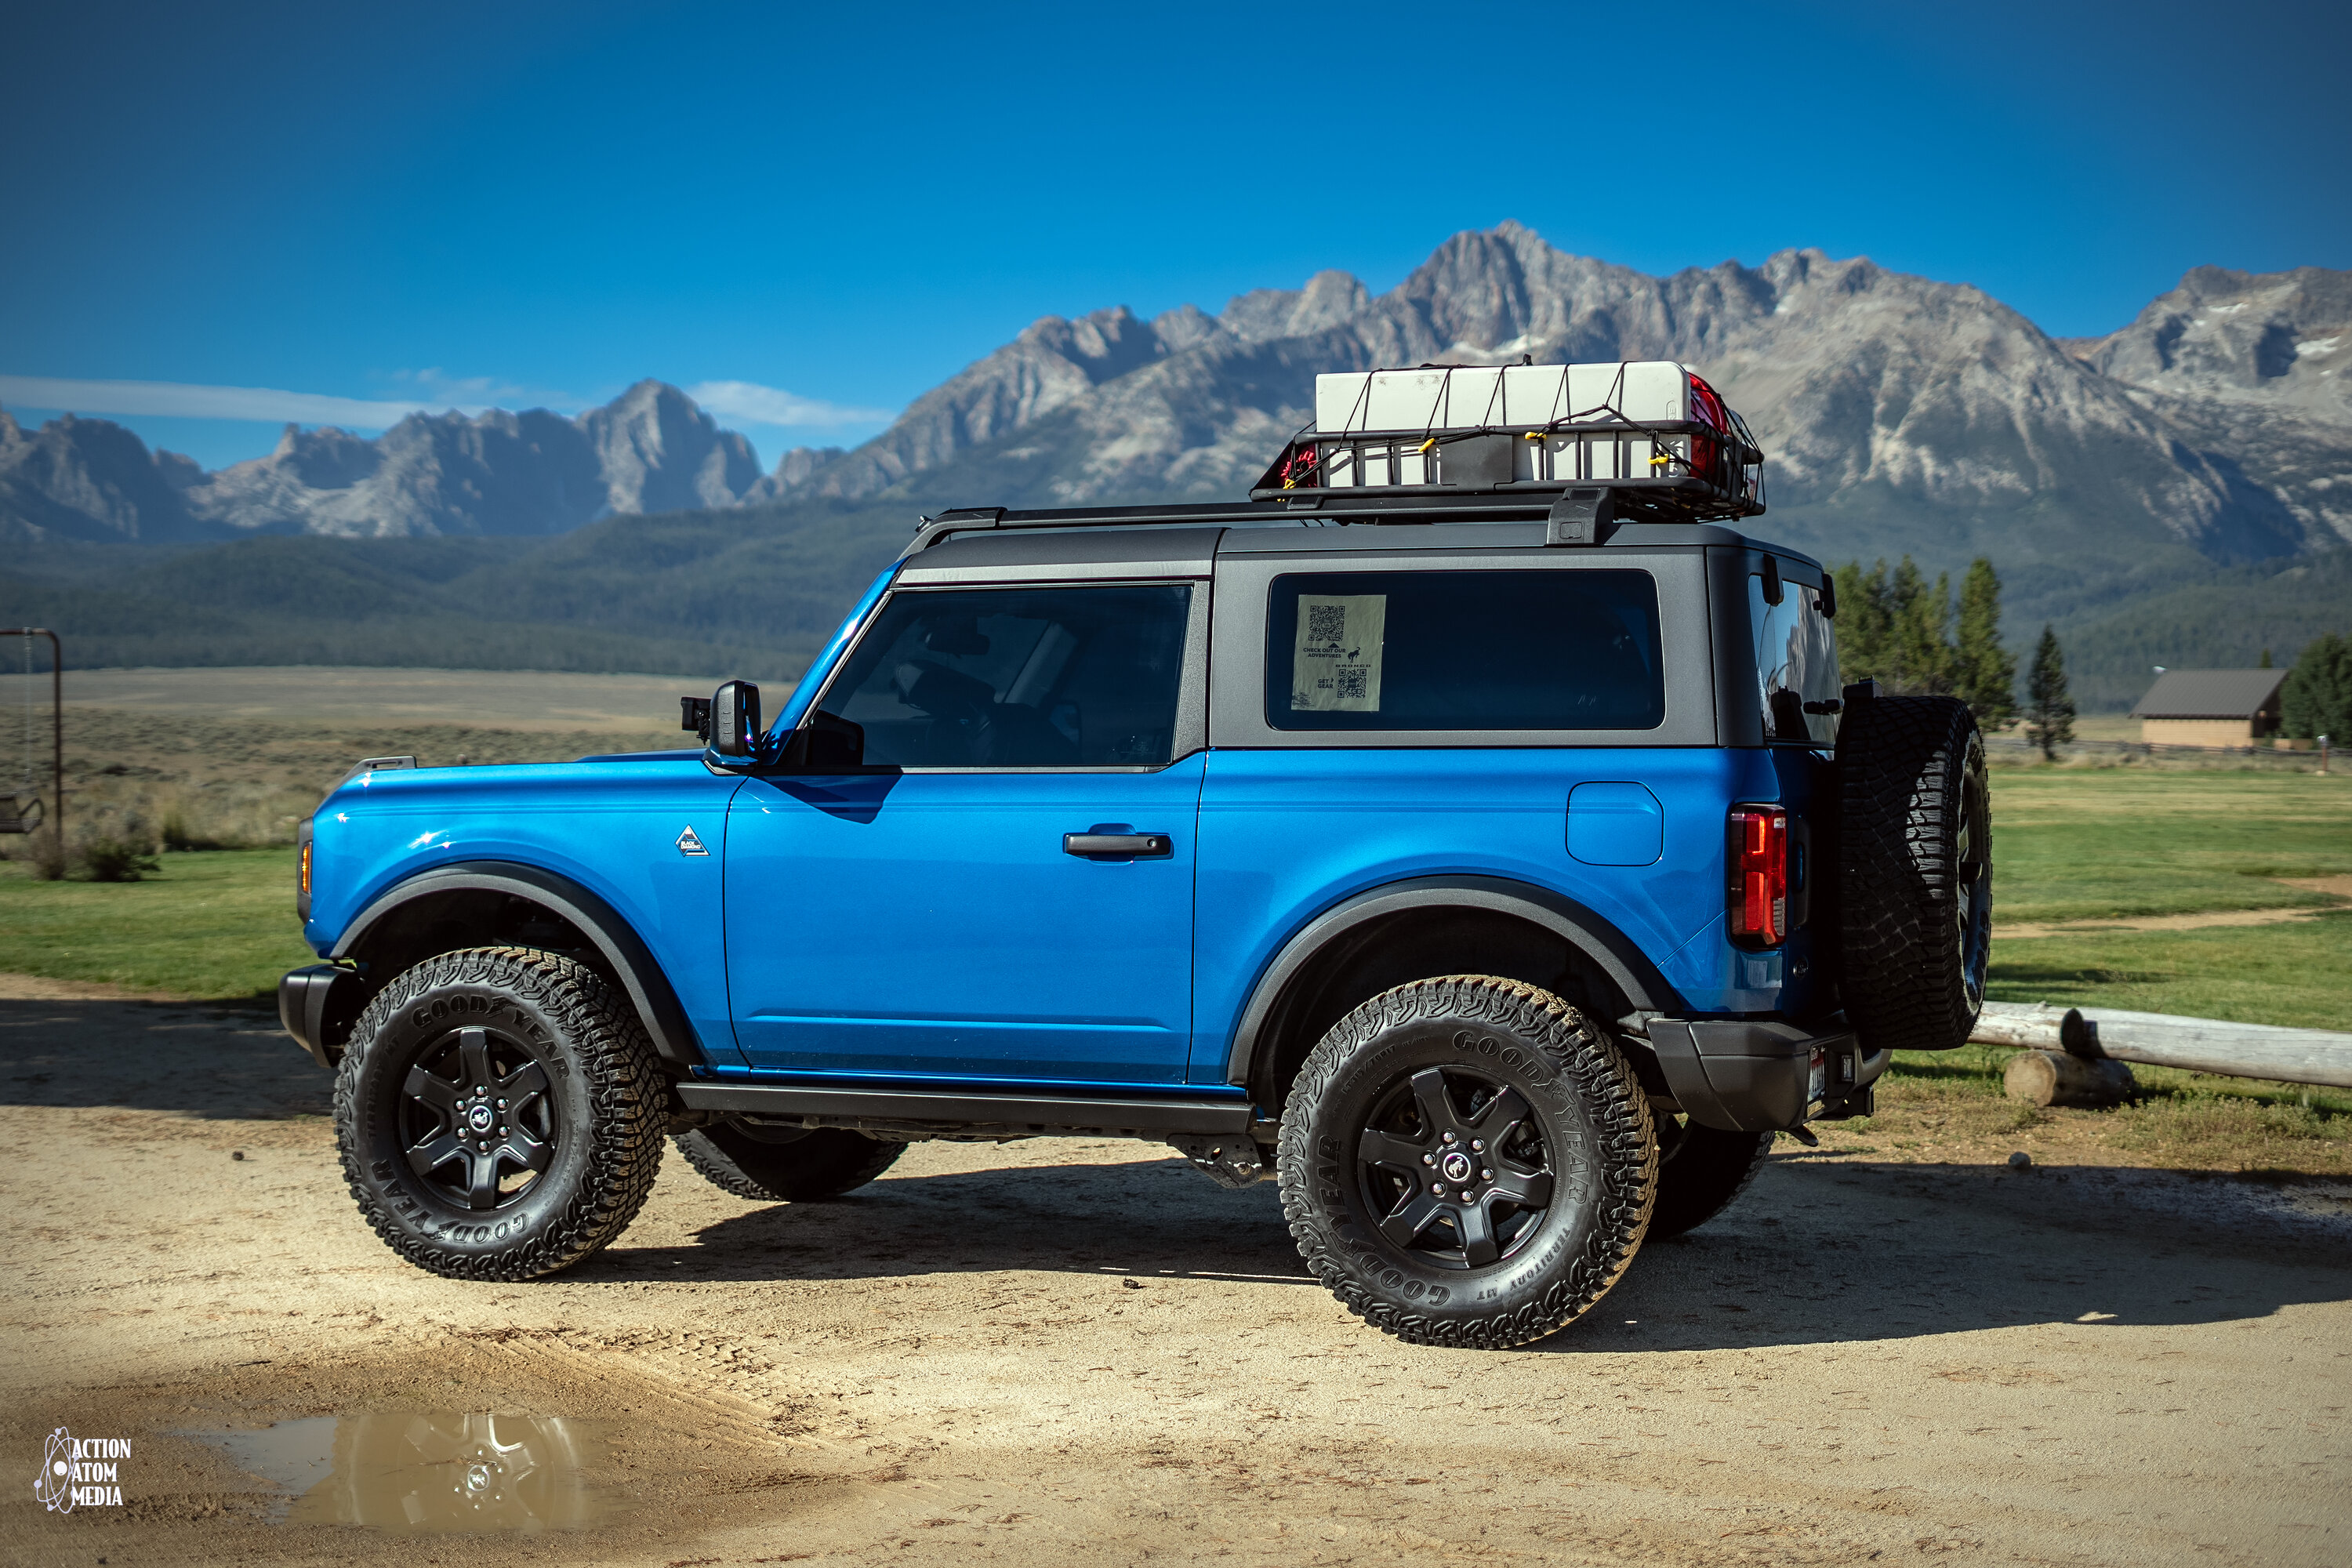 Ford Bronco 2 Door Broncos - What’s on your roof racks? [Photos Thread] Camp Bronco 1